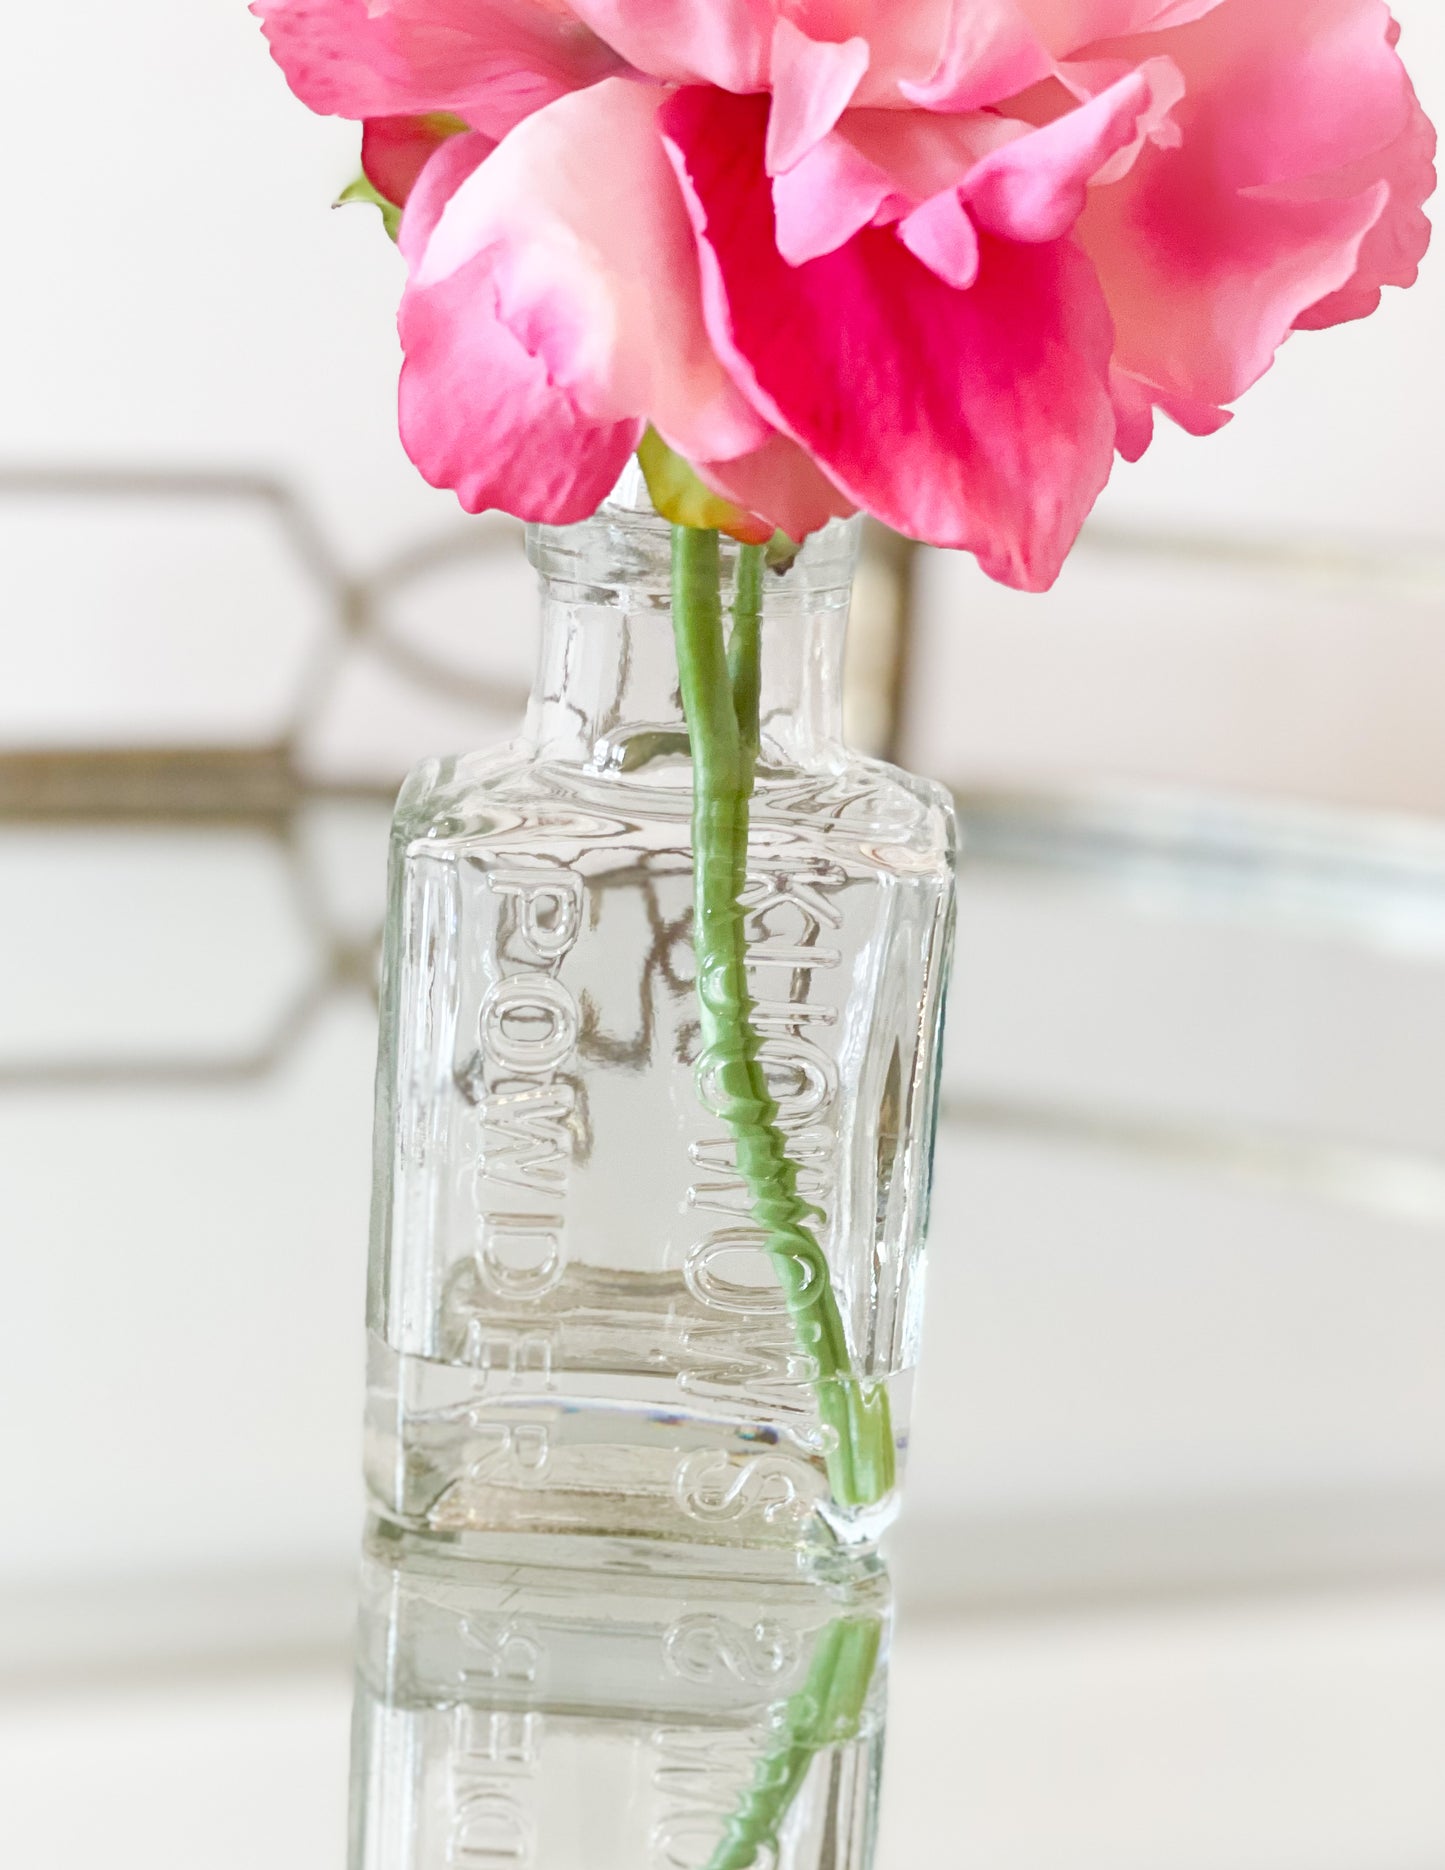 WHITE PEONY IN GLASS VASE WITH ACRYLIC WATER